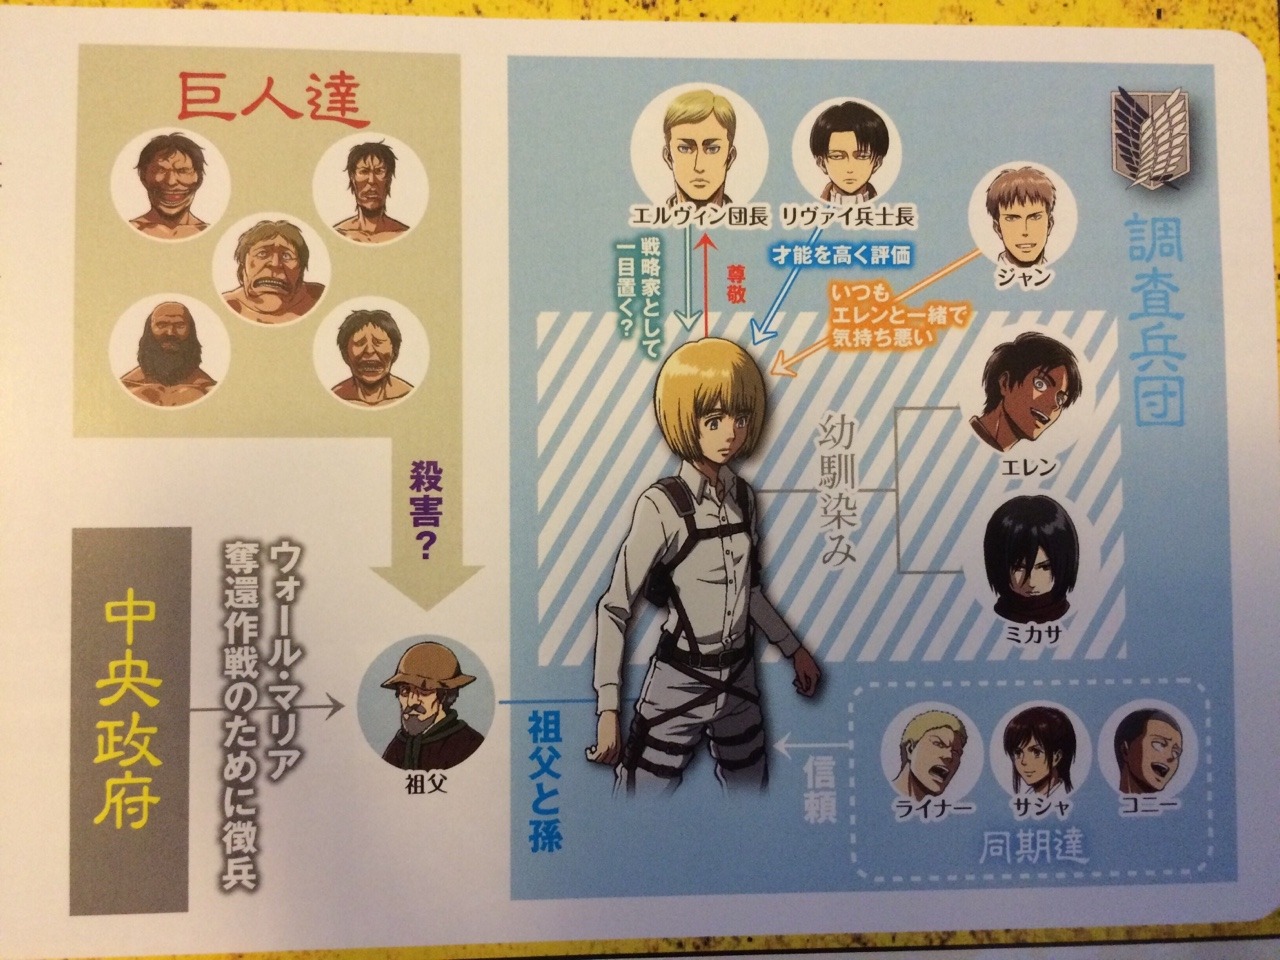 My issue of Gekkan Shingeki no Kyojin vol. 5, featuring Armin, arrived today! The